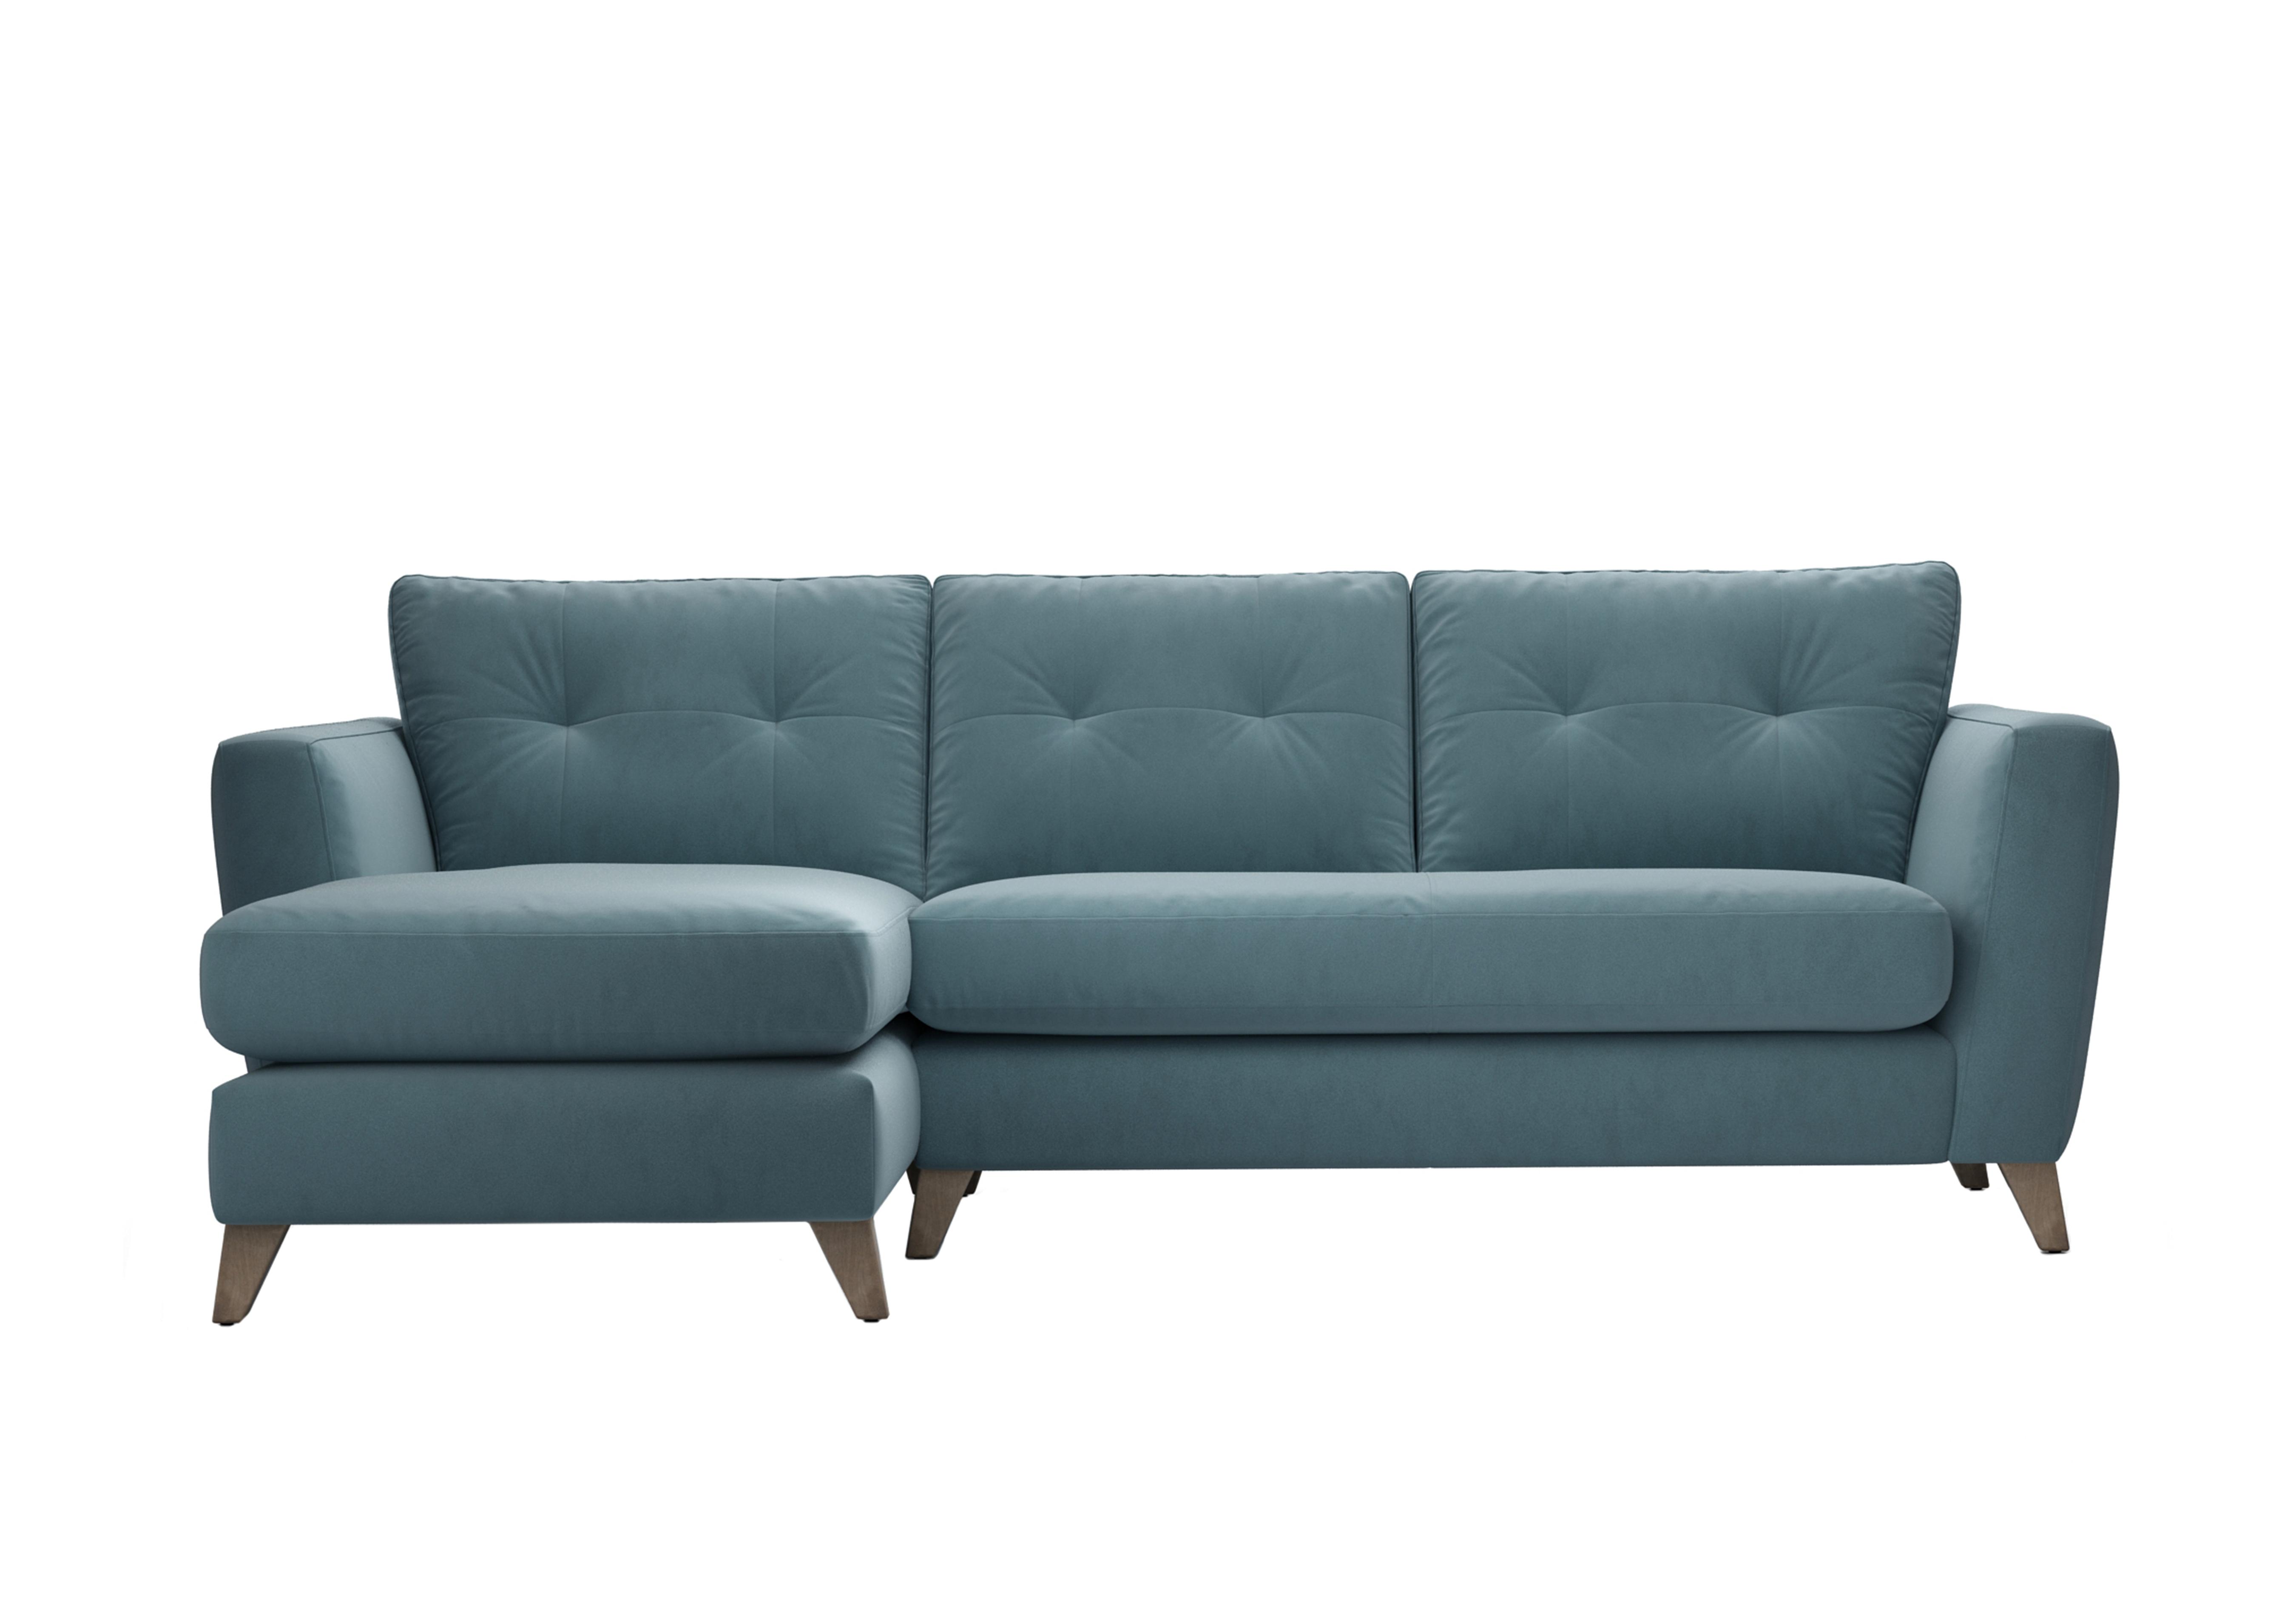 Hermione Fabric Corner Sofa with Chaise End in Sha252 Shallow Puddle Wo Ft on Furniture Village